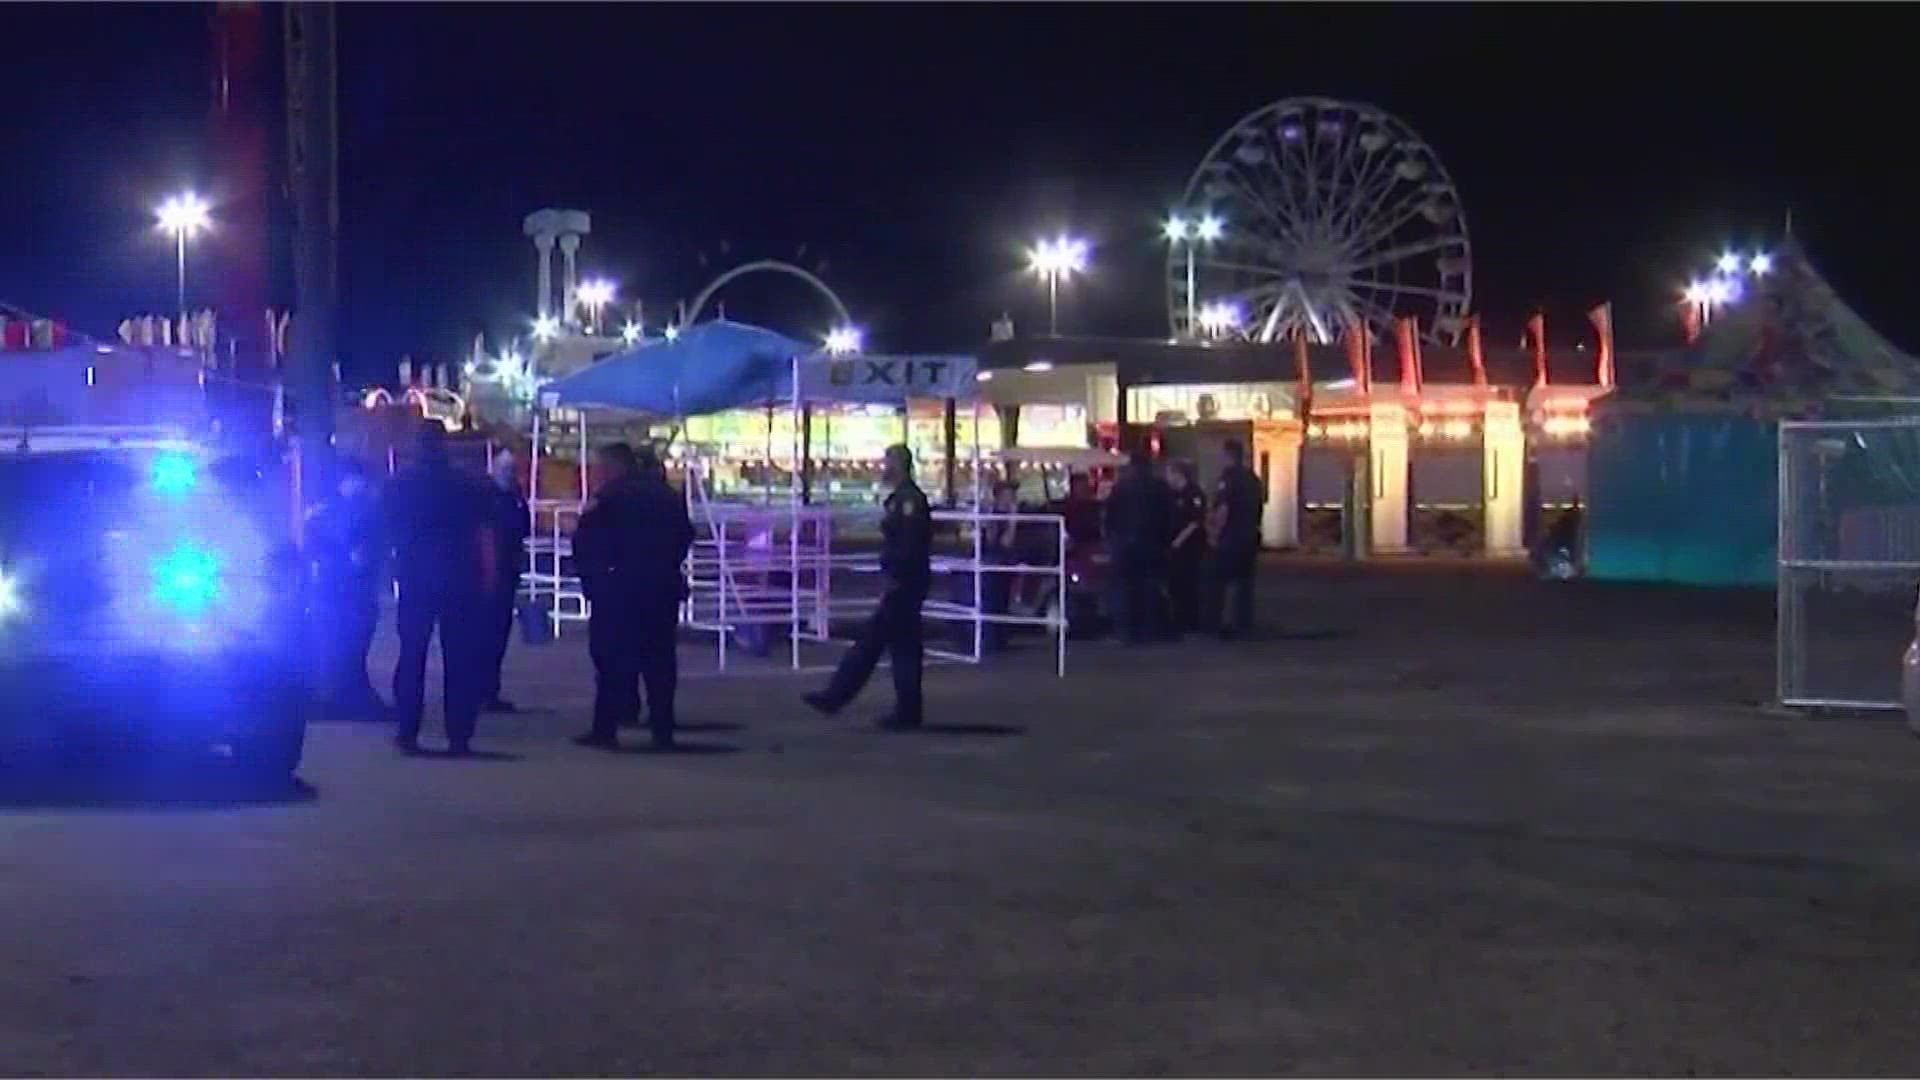 Just before 11 p.m. Monday, a man opened fire on Potter County deputies working off-duty at the fair in Amarillo.